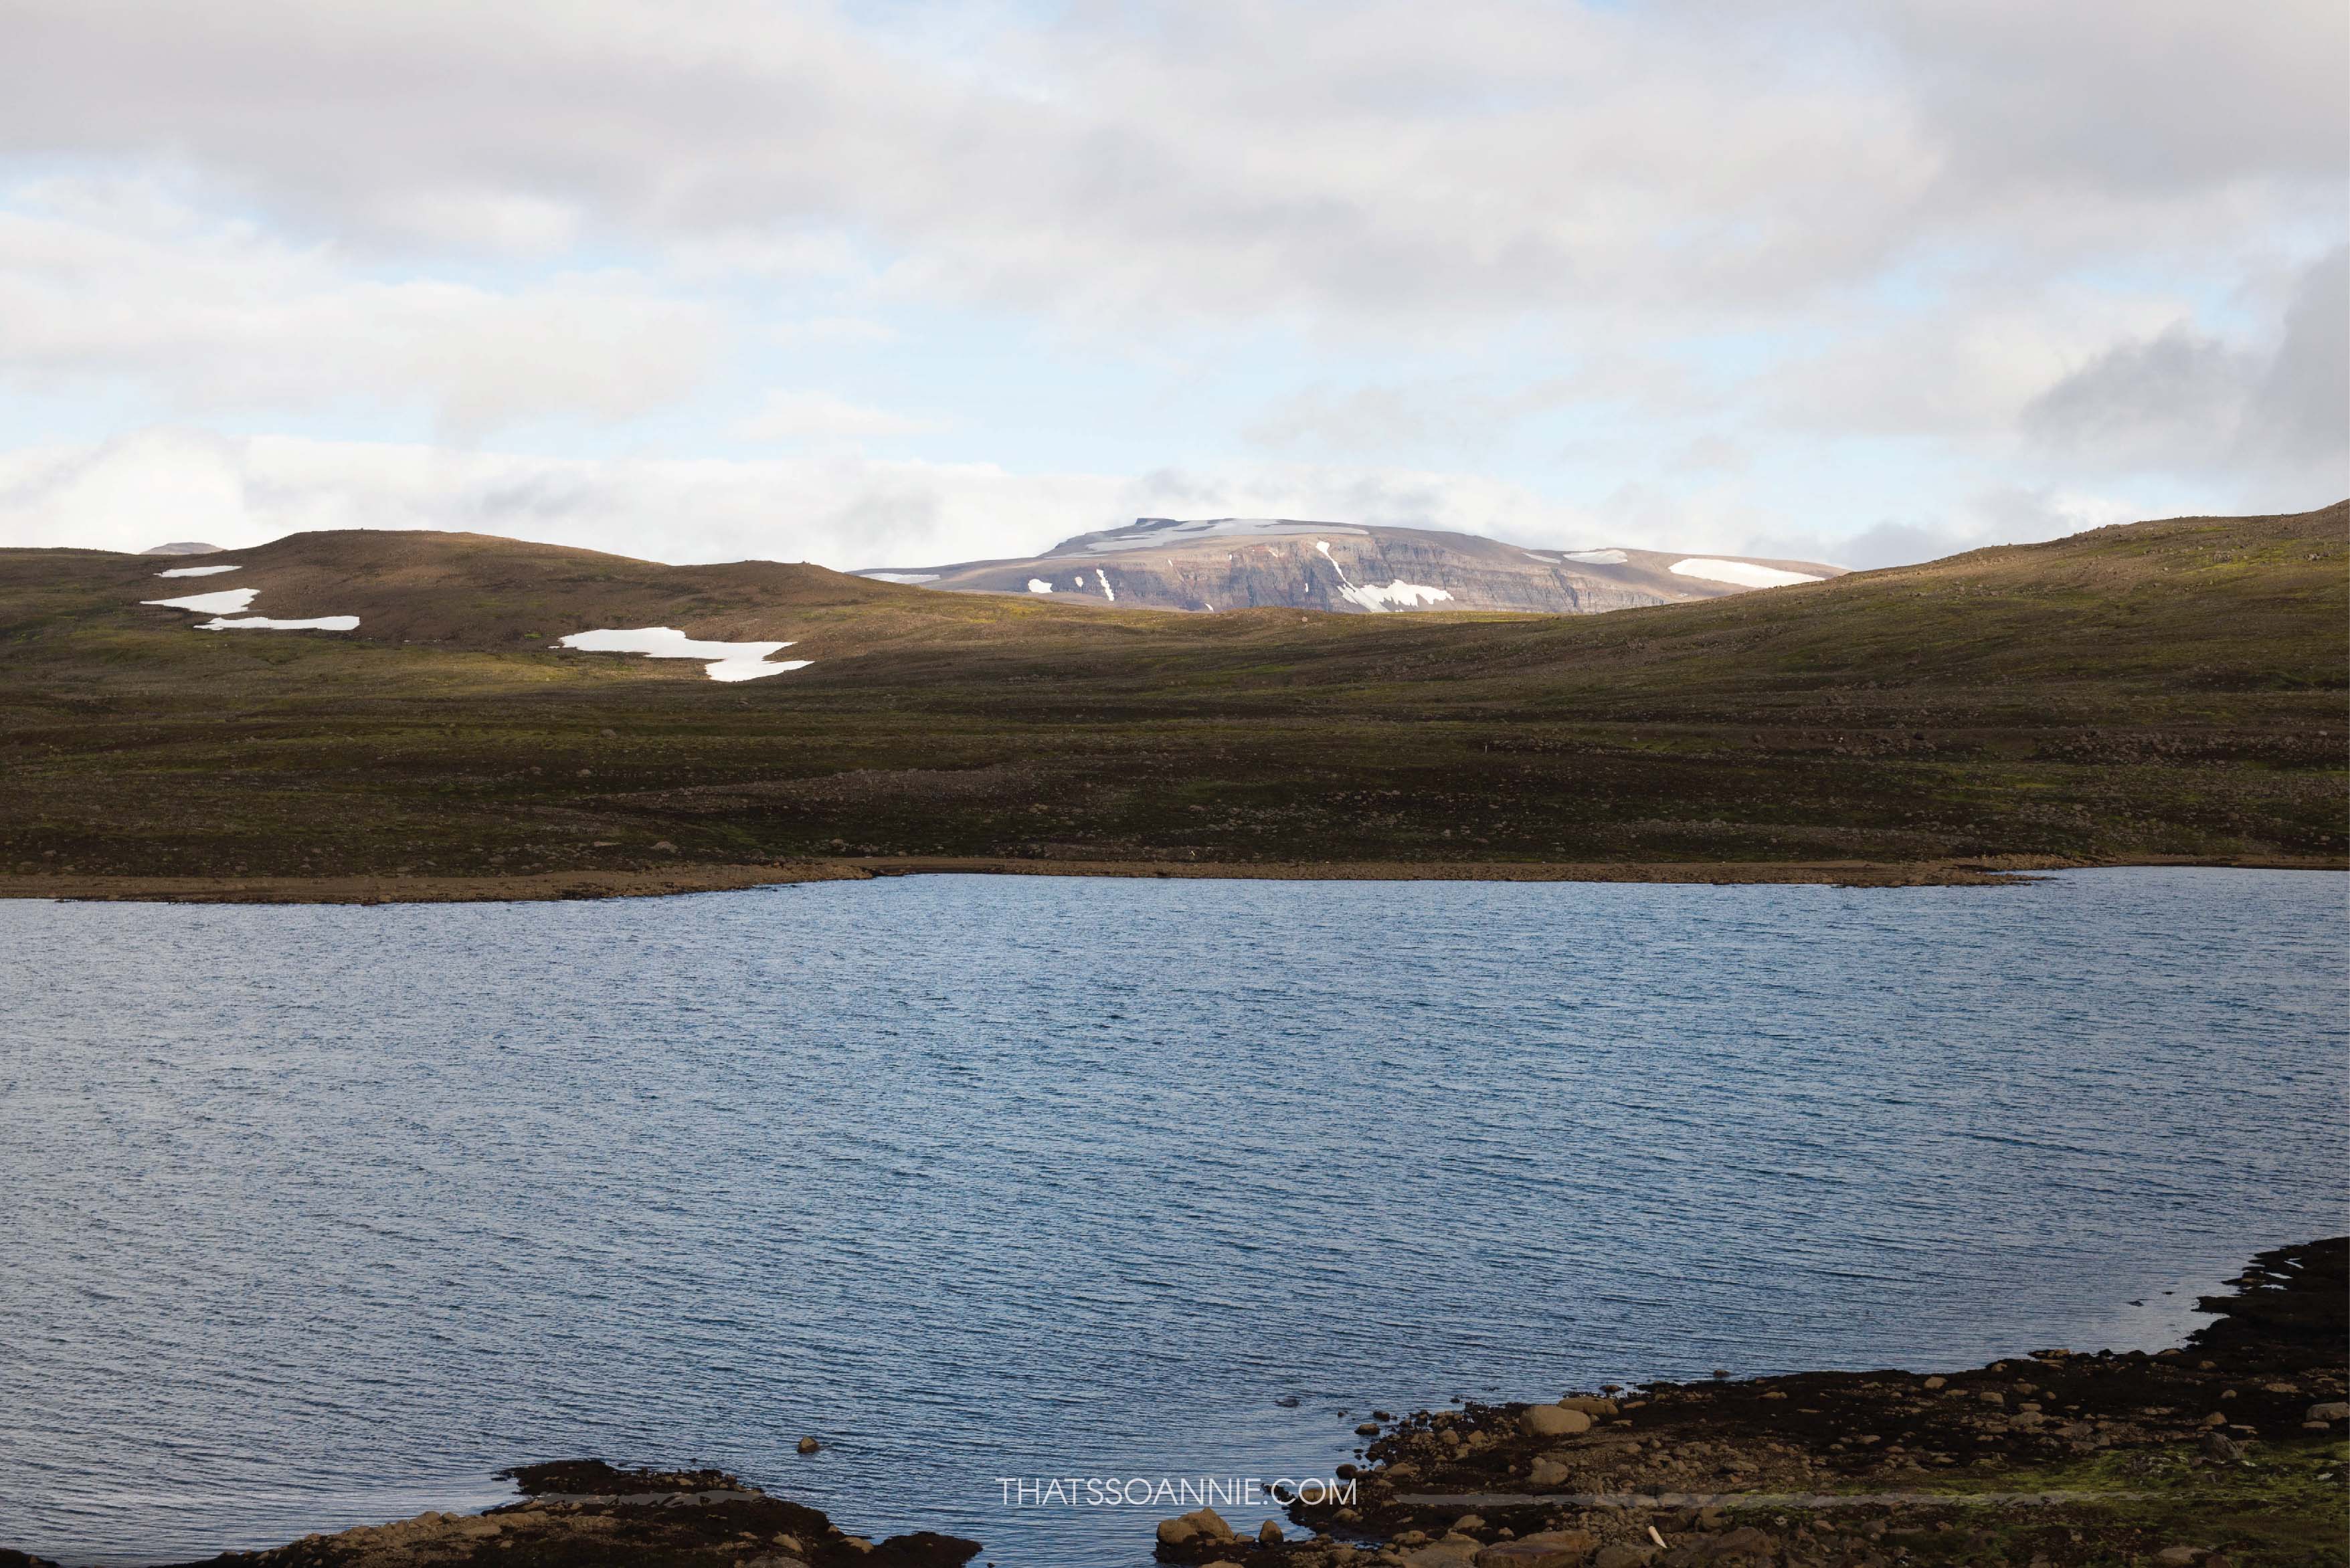 The secret lake in the mountains, Heiðarvatn